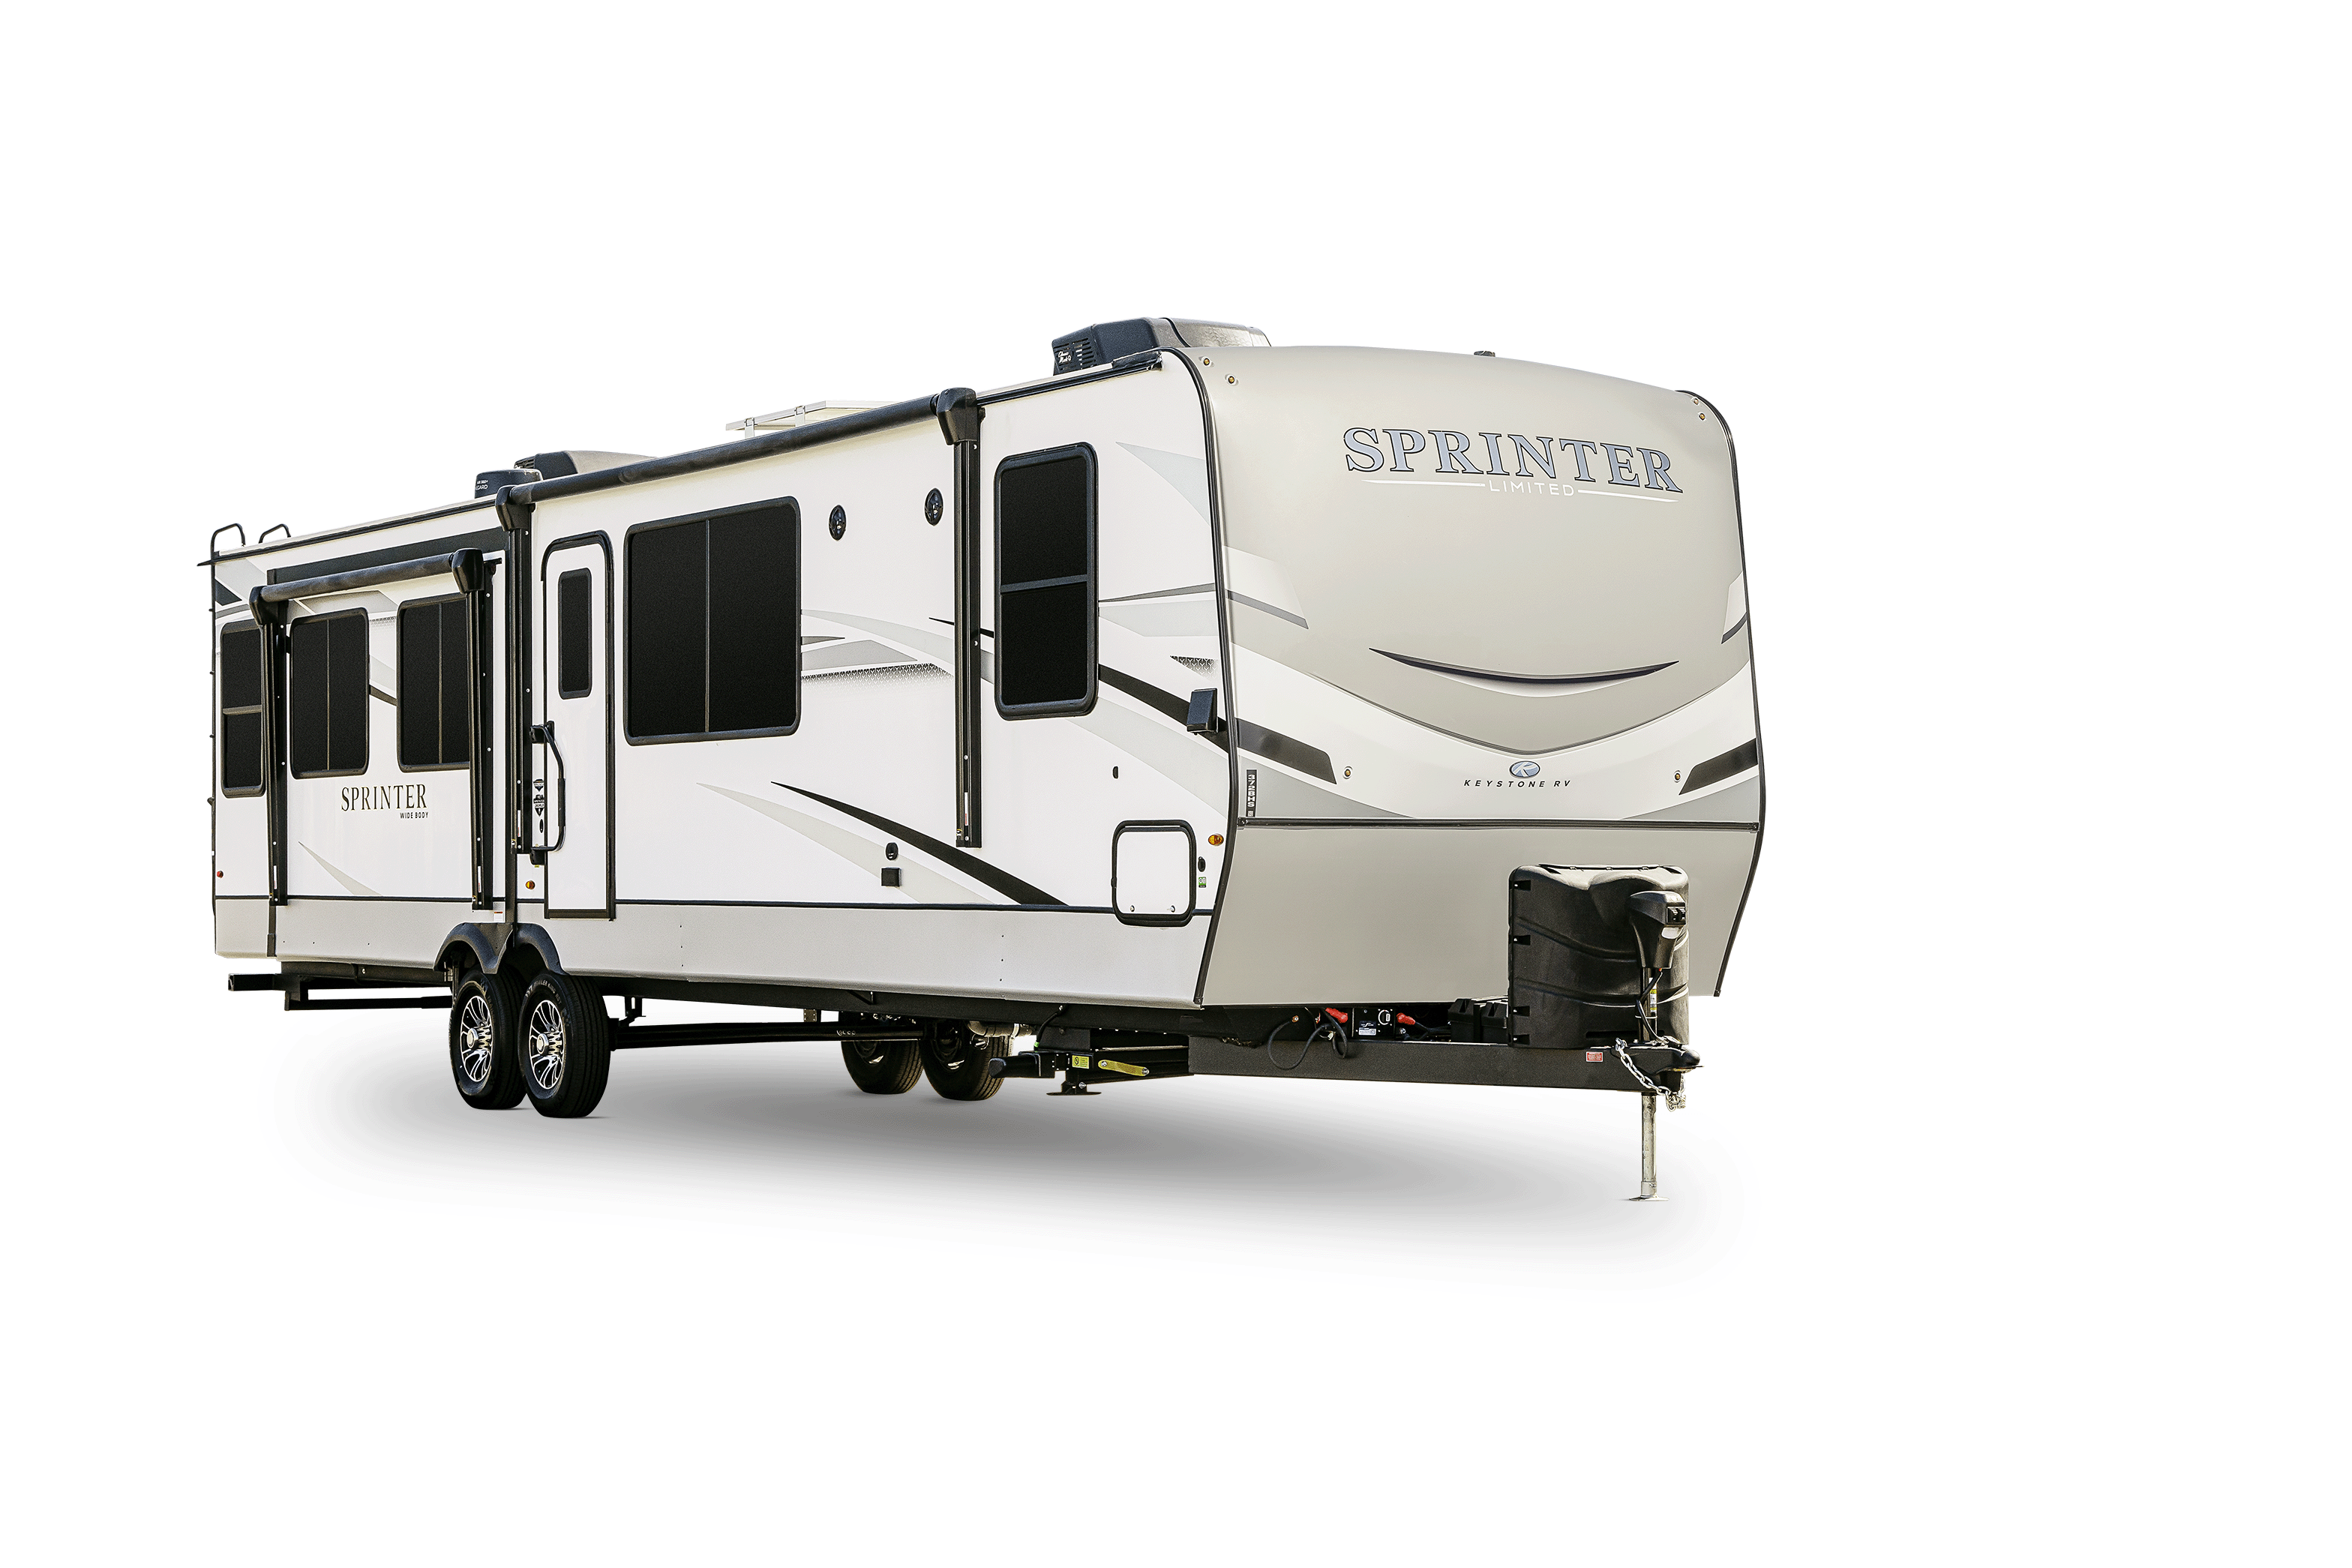 who manufactures sprinter travel trailers